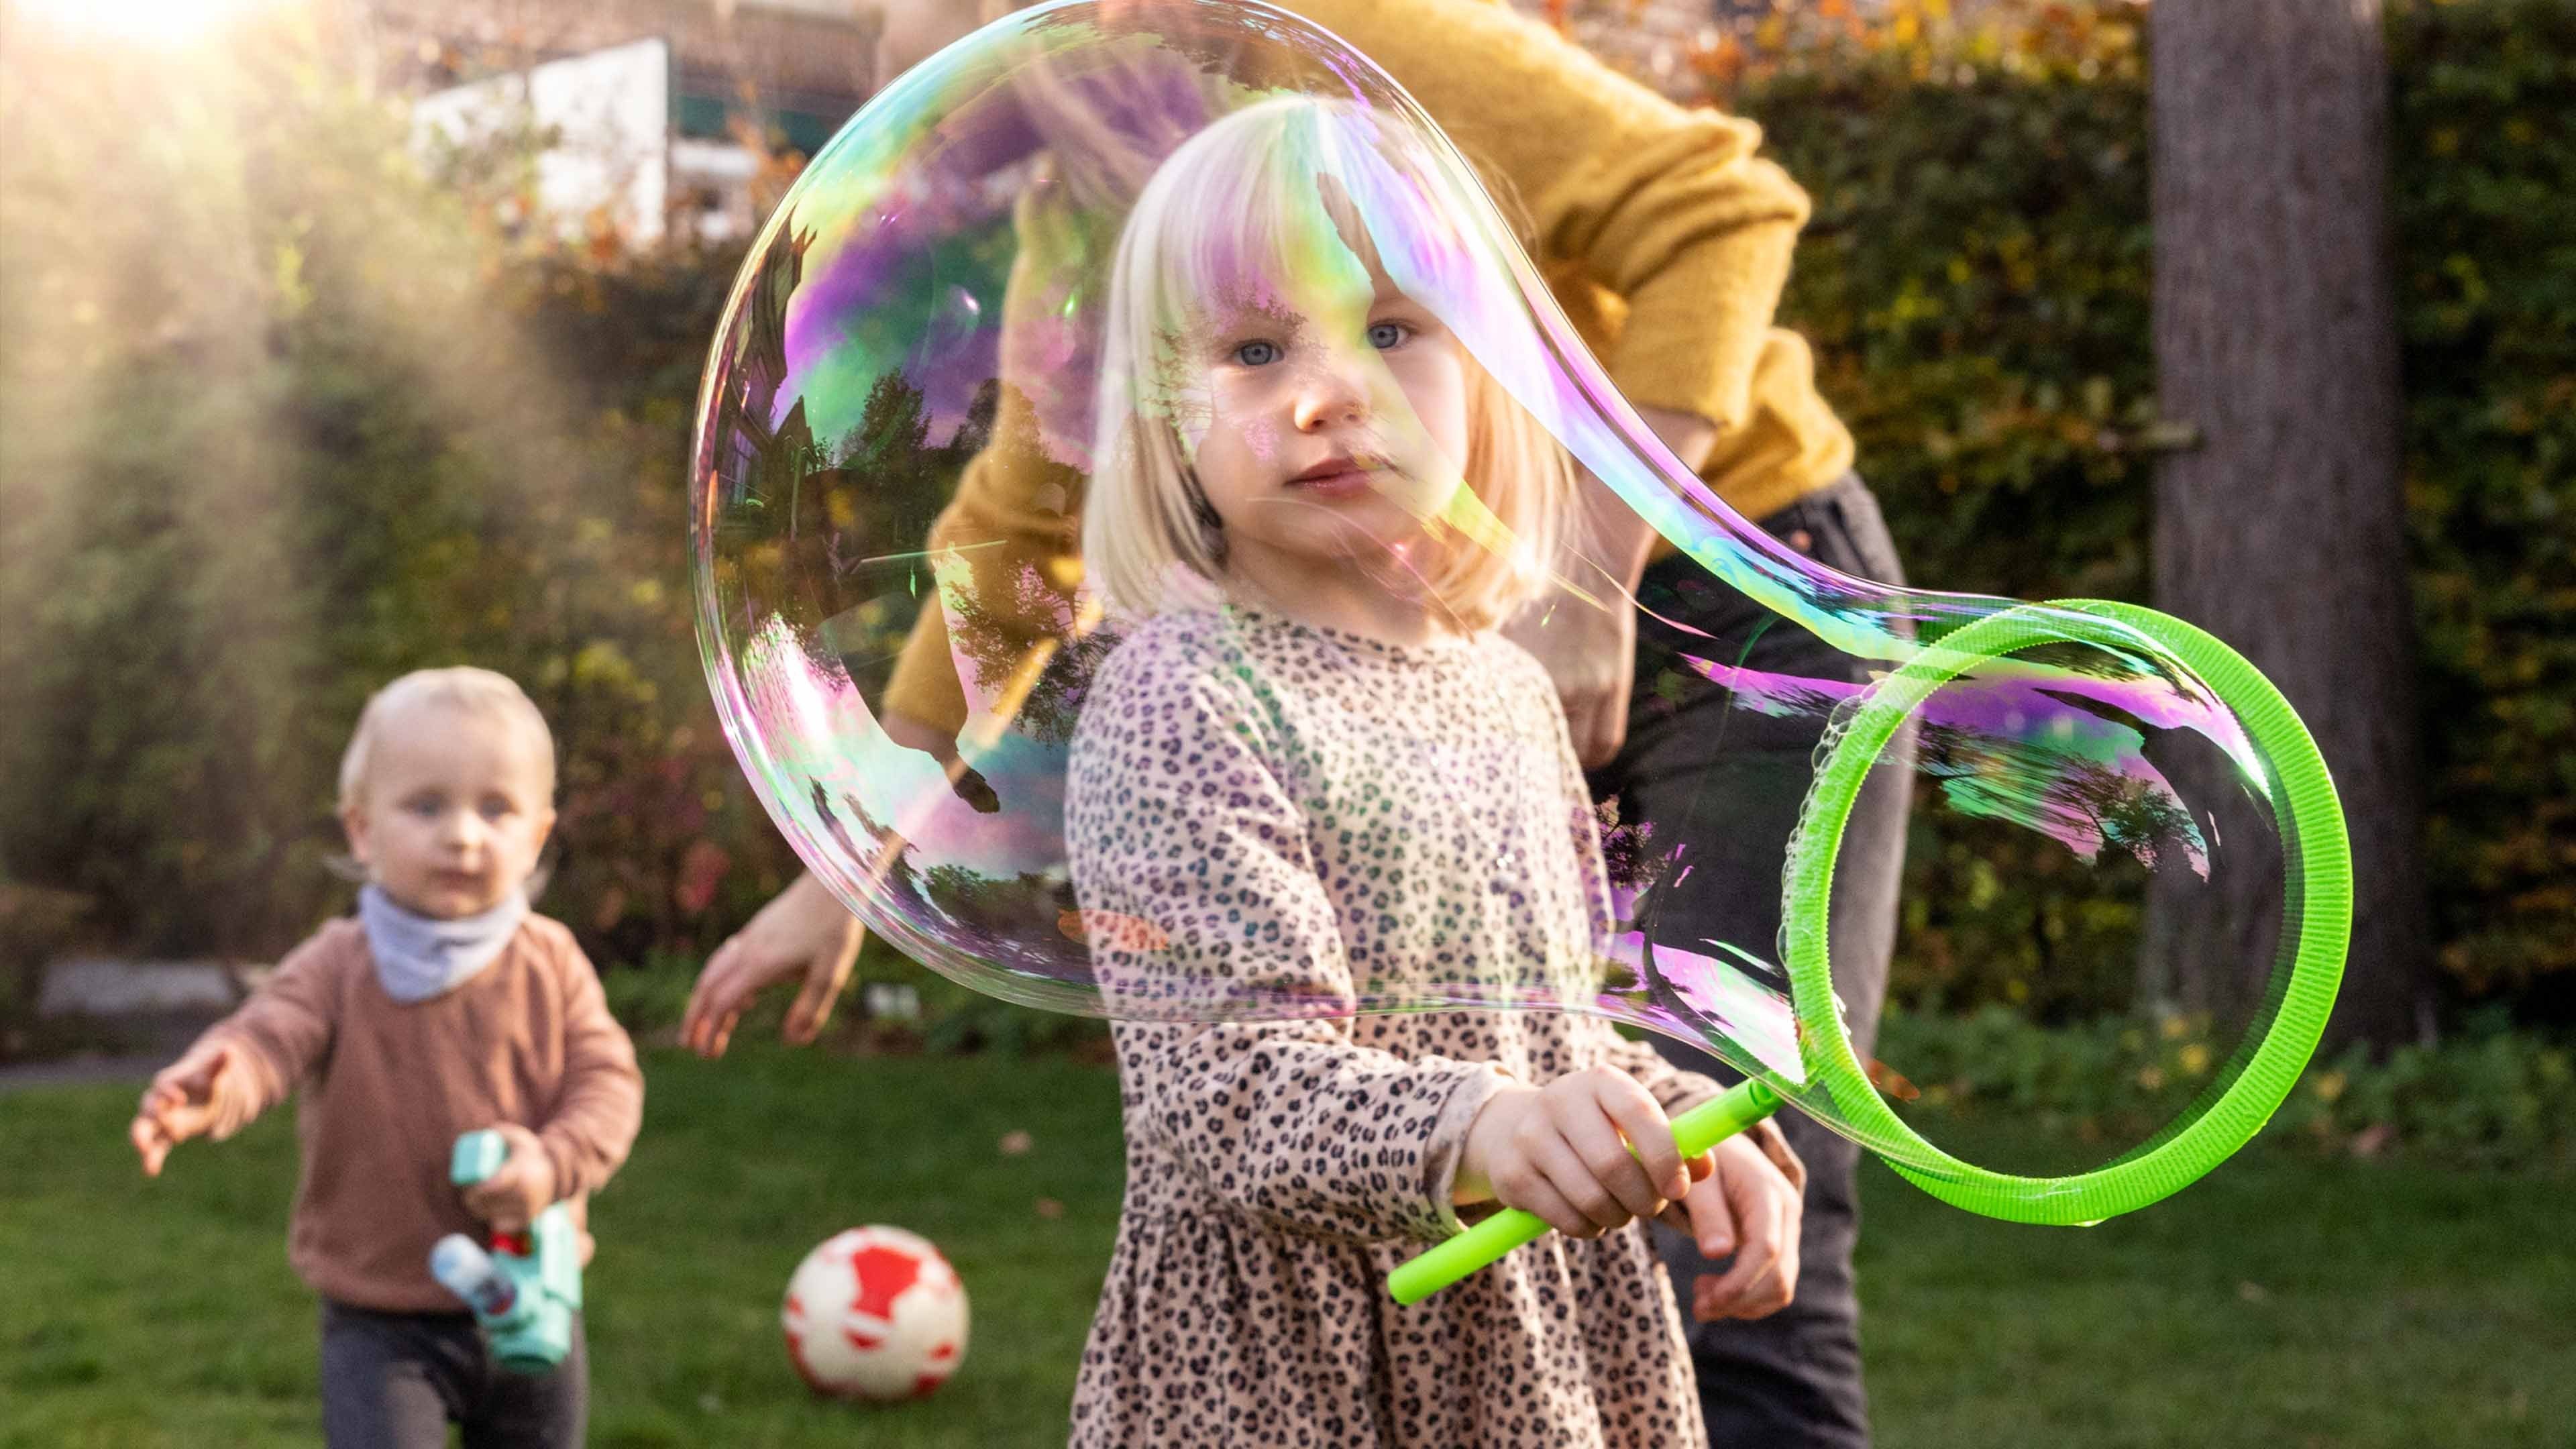 A girl and a small boy playing with soap bubbles